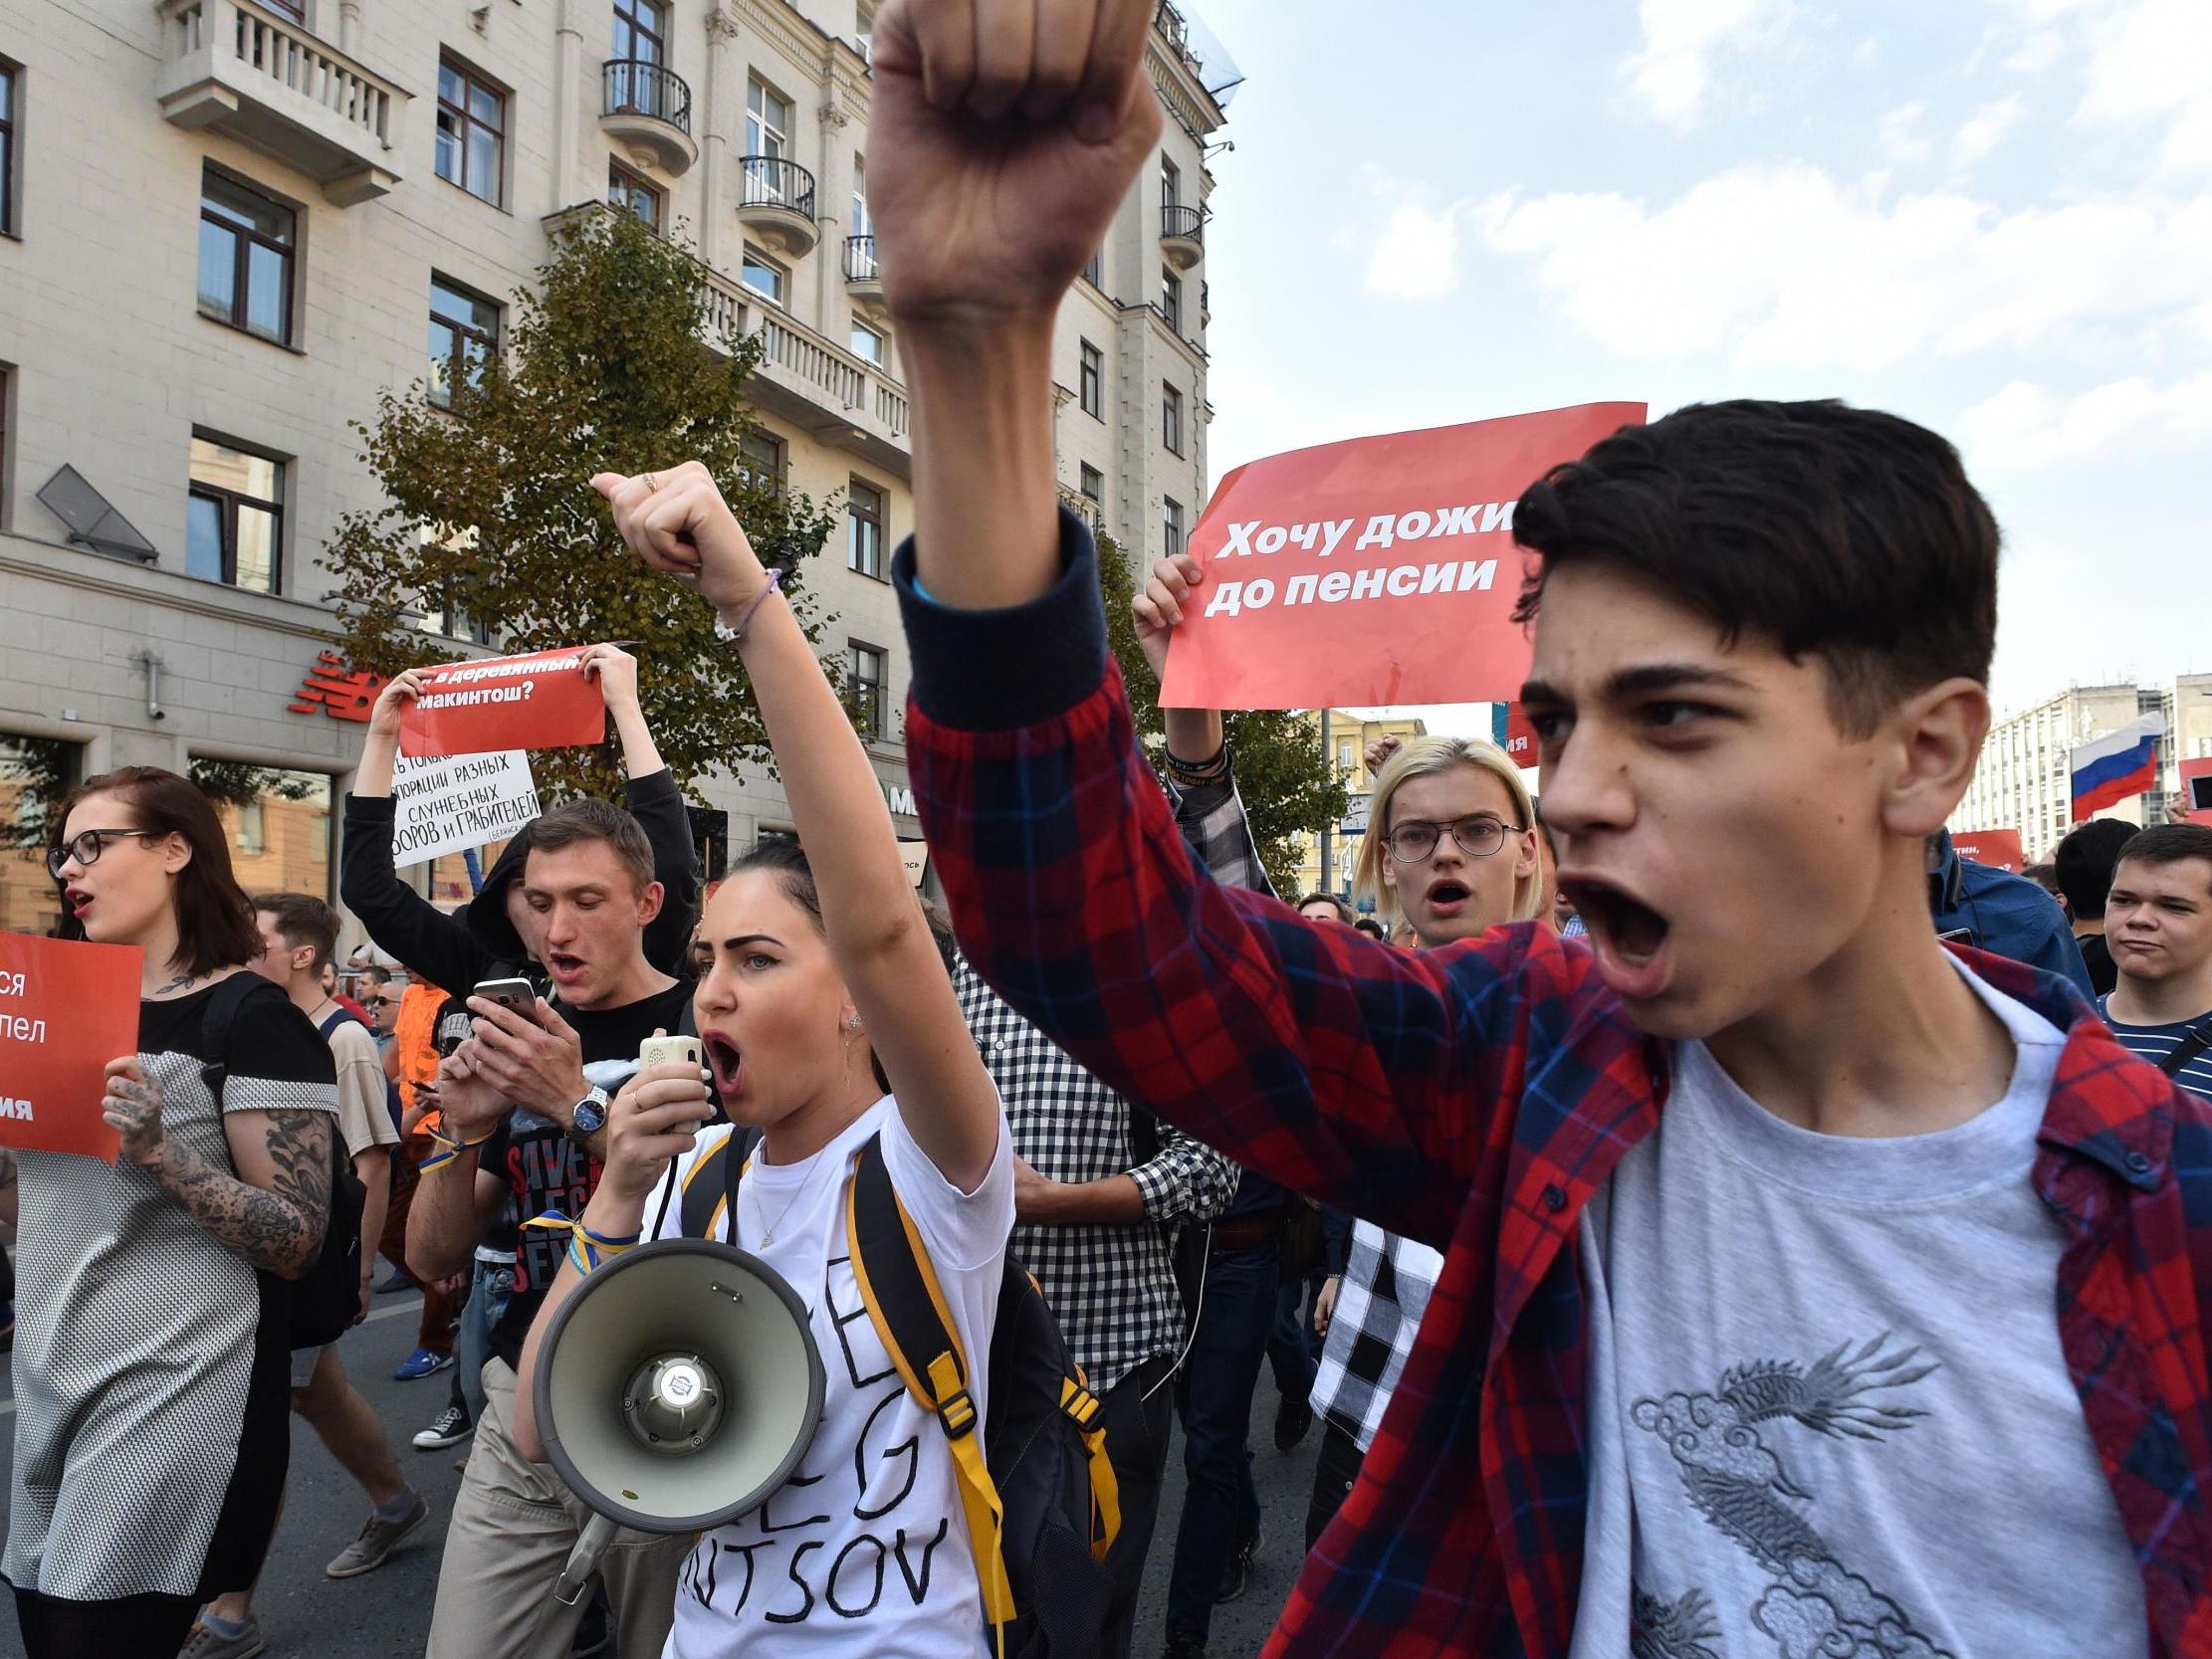 Most protesters were young and said they wanted a better future